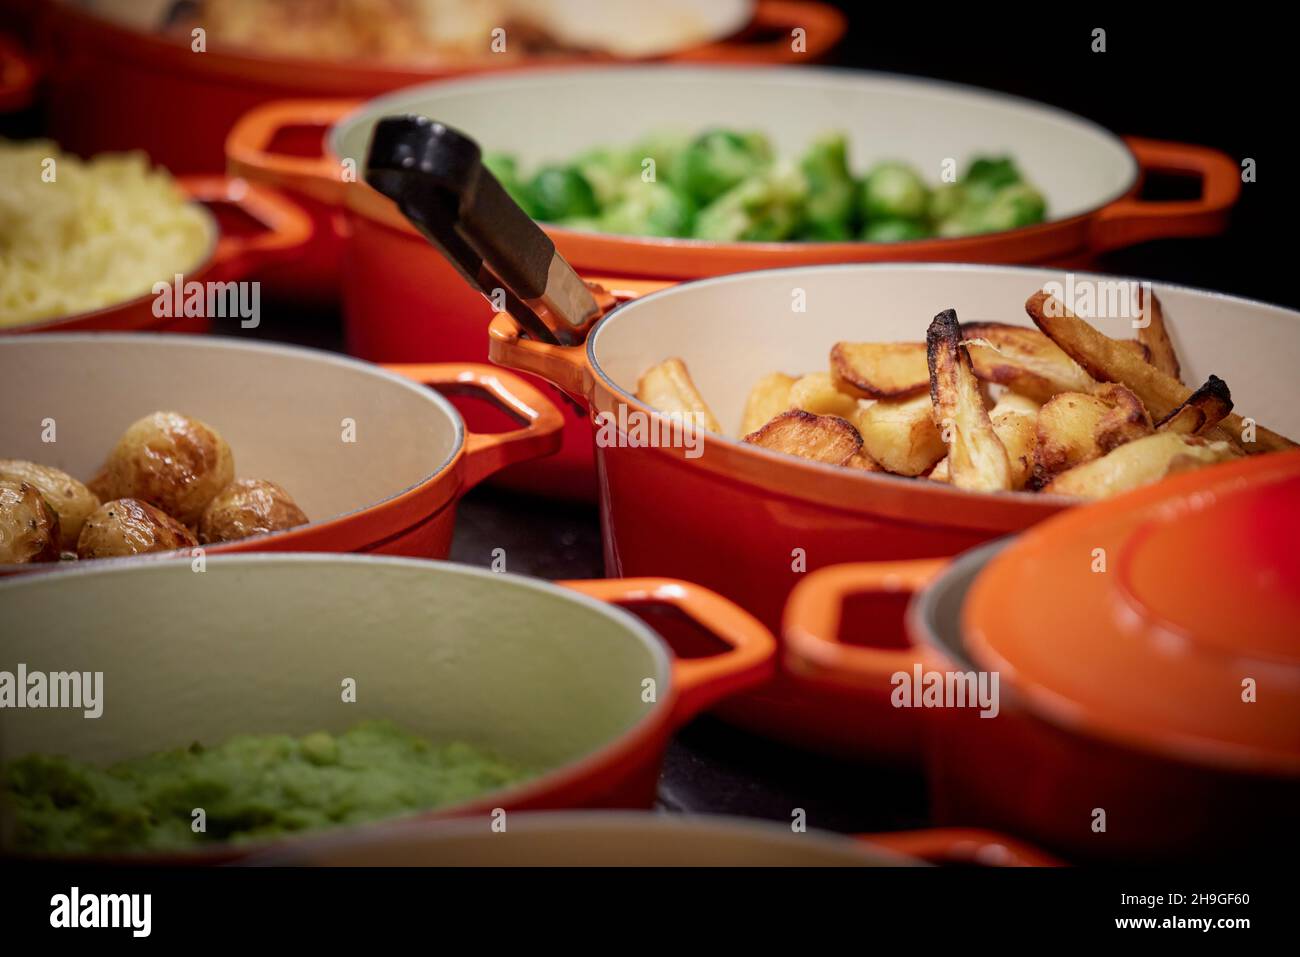 Pub carvery self service cooking pots, roasted potatoes, parsnips, Brussel spouts, Stock Photo